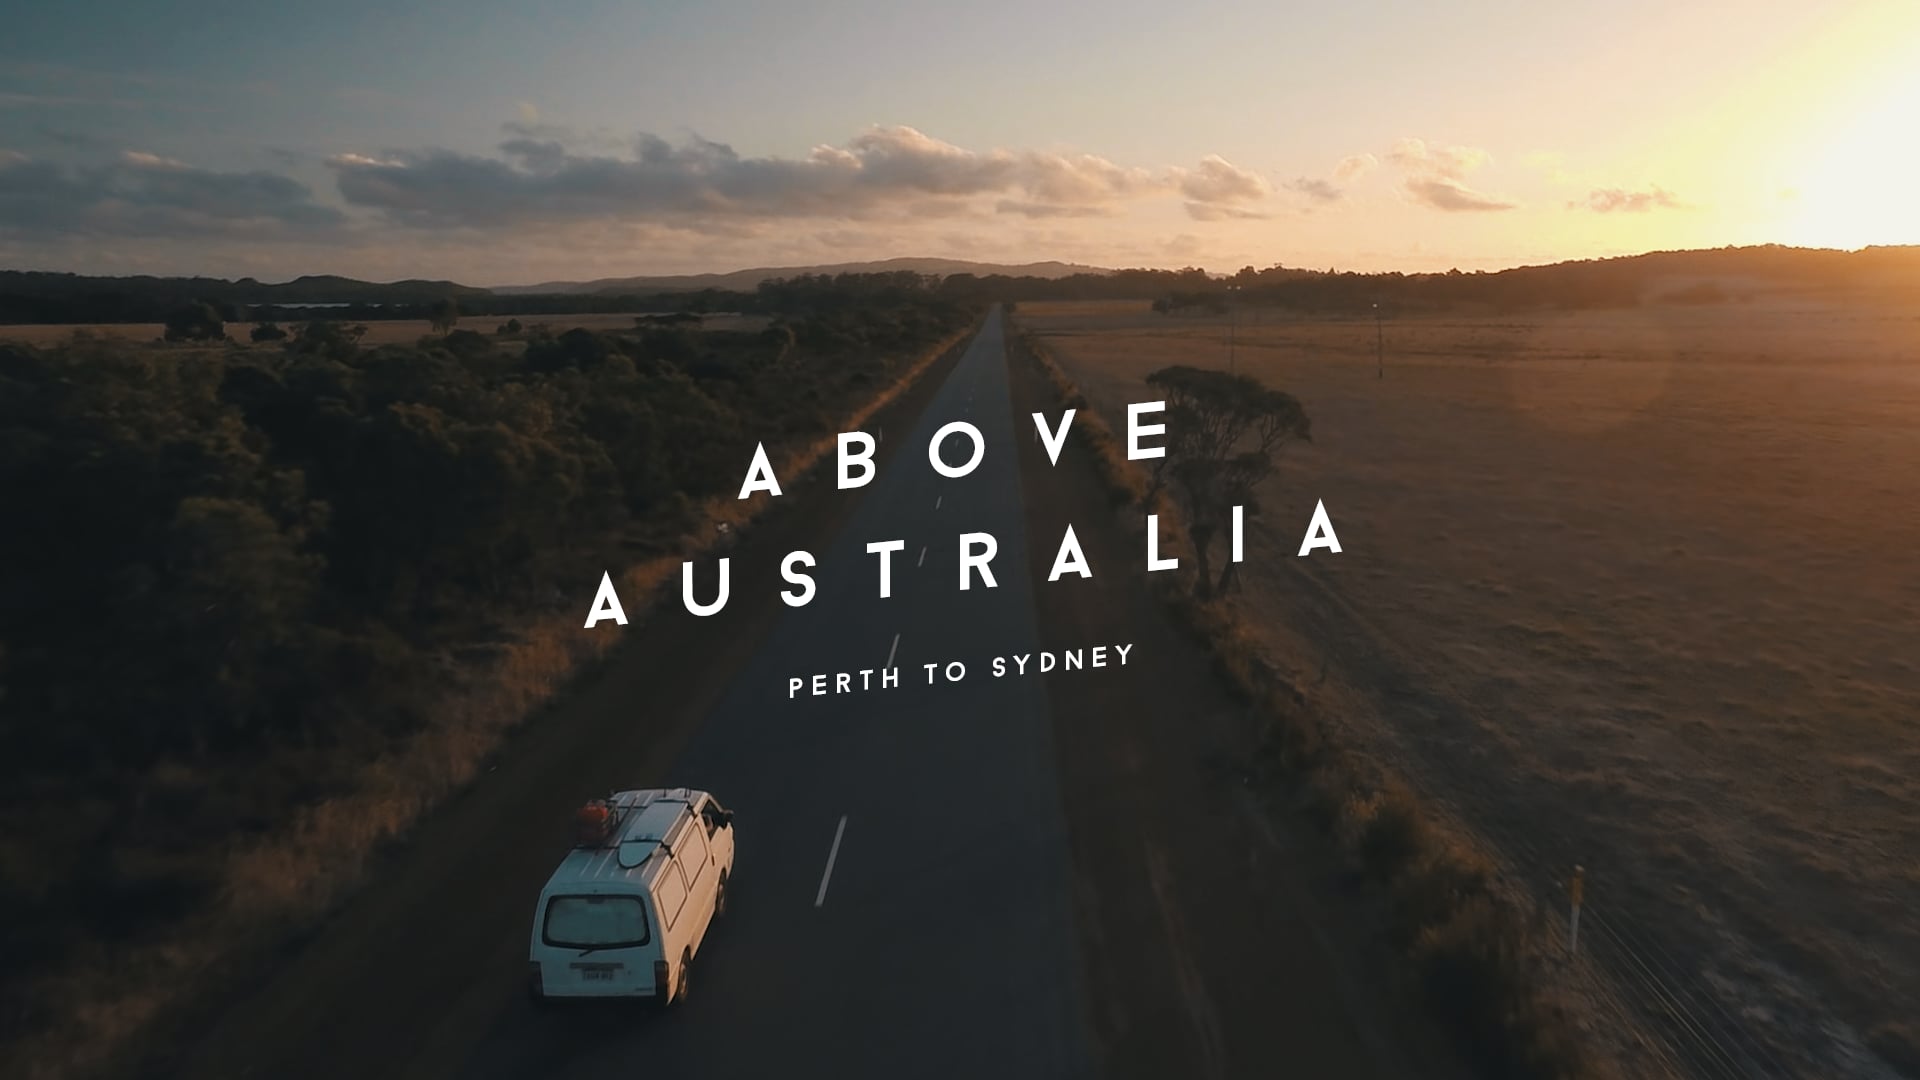 This Australian road trip will make you want to pack your bags and hit the road!